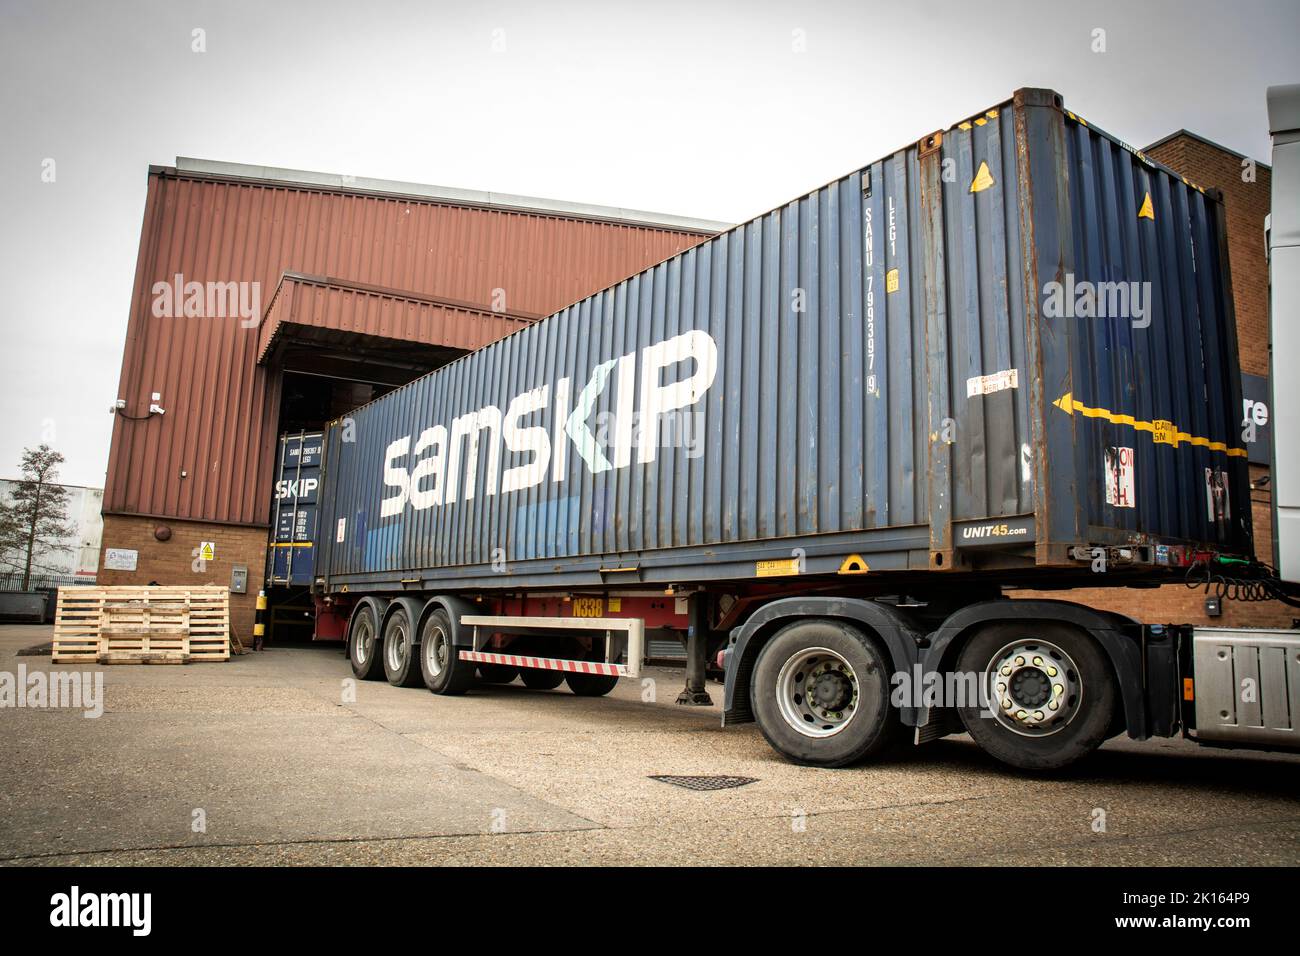 truck delivering cargo and goods in shipping containers, to a warehouse of a business, watford , uk Stock Photo